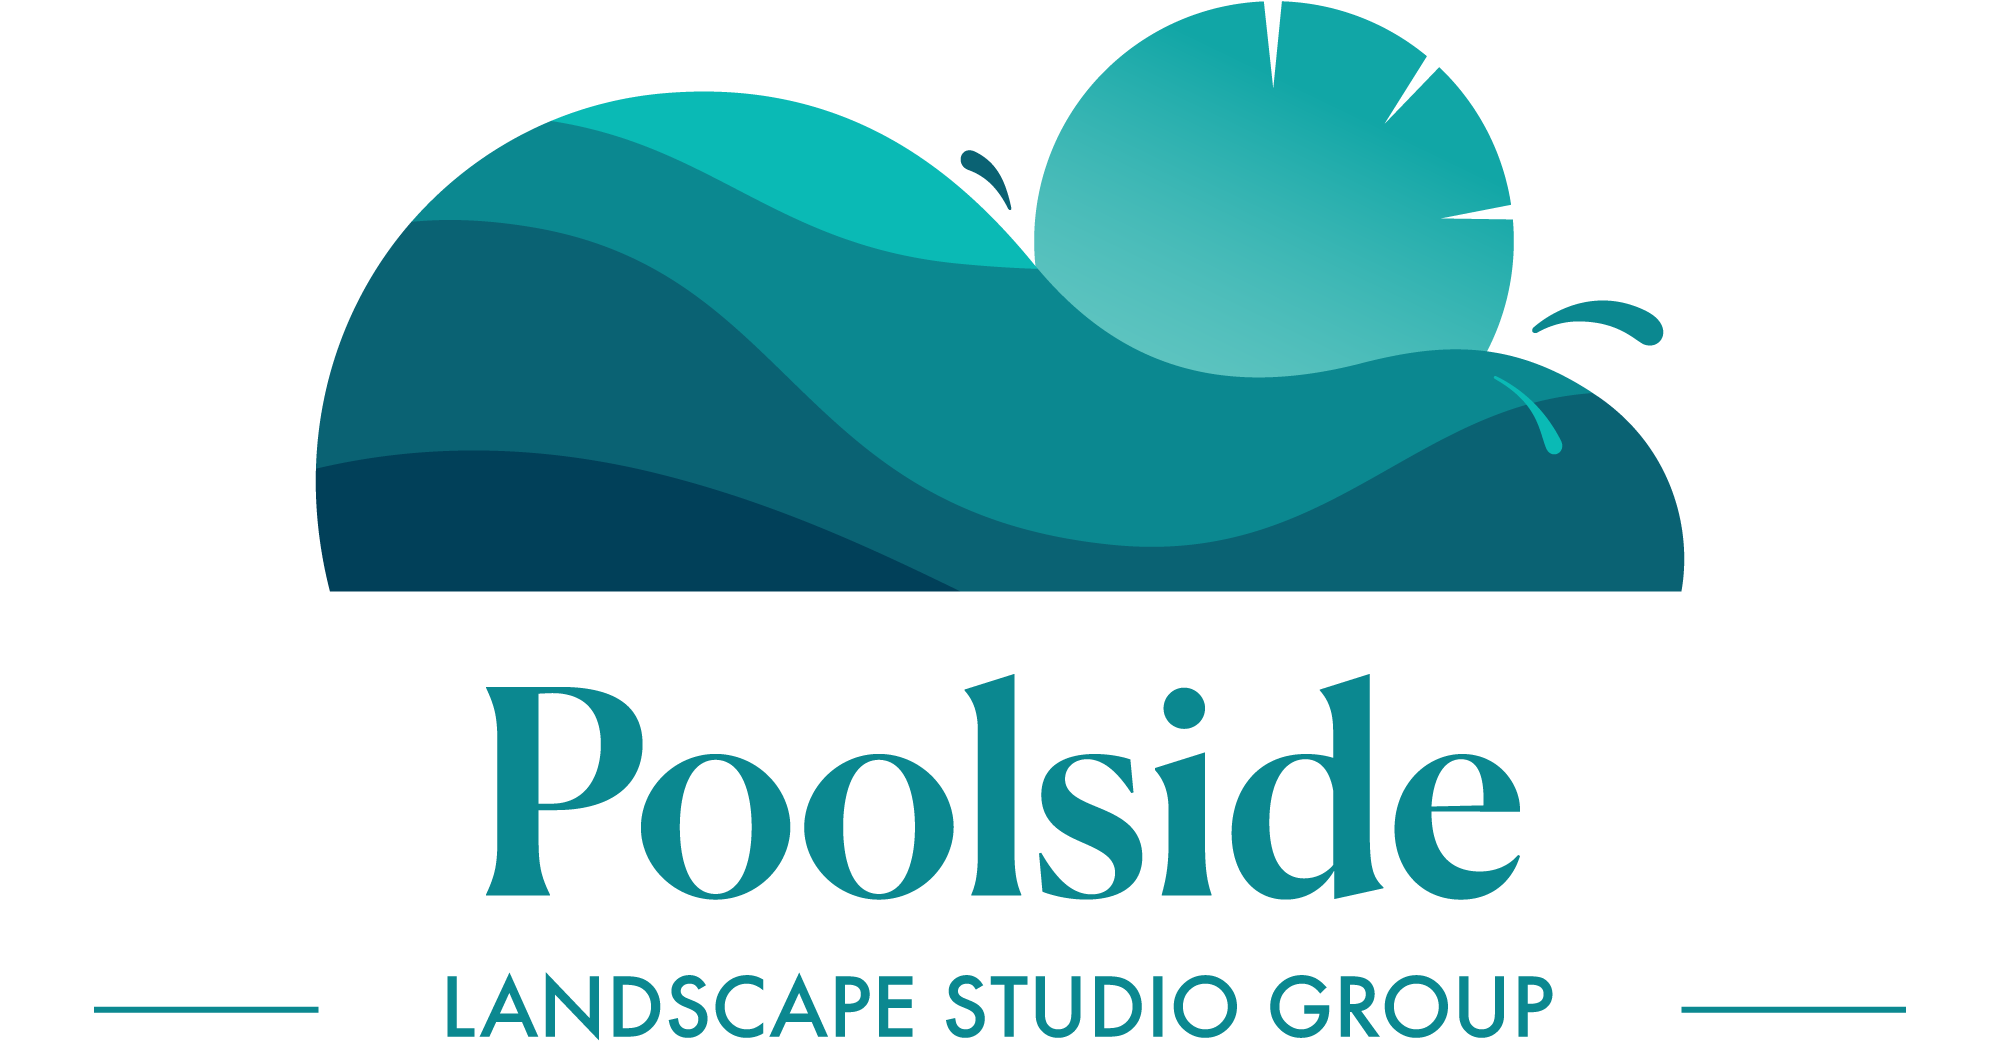 A blue-striped bean-shaped pool with a clock or sun icon and splash drips above the word Poolside, a Landscape Studio Group division